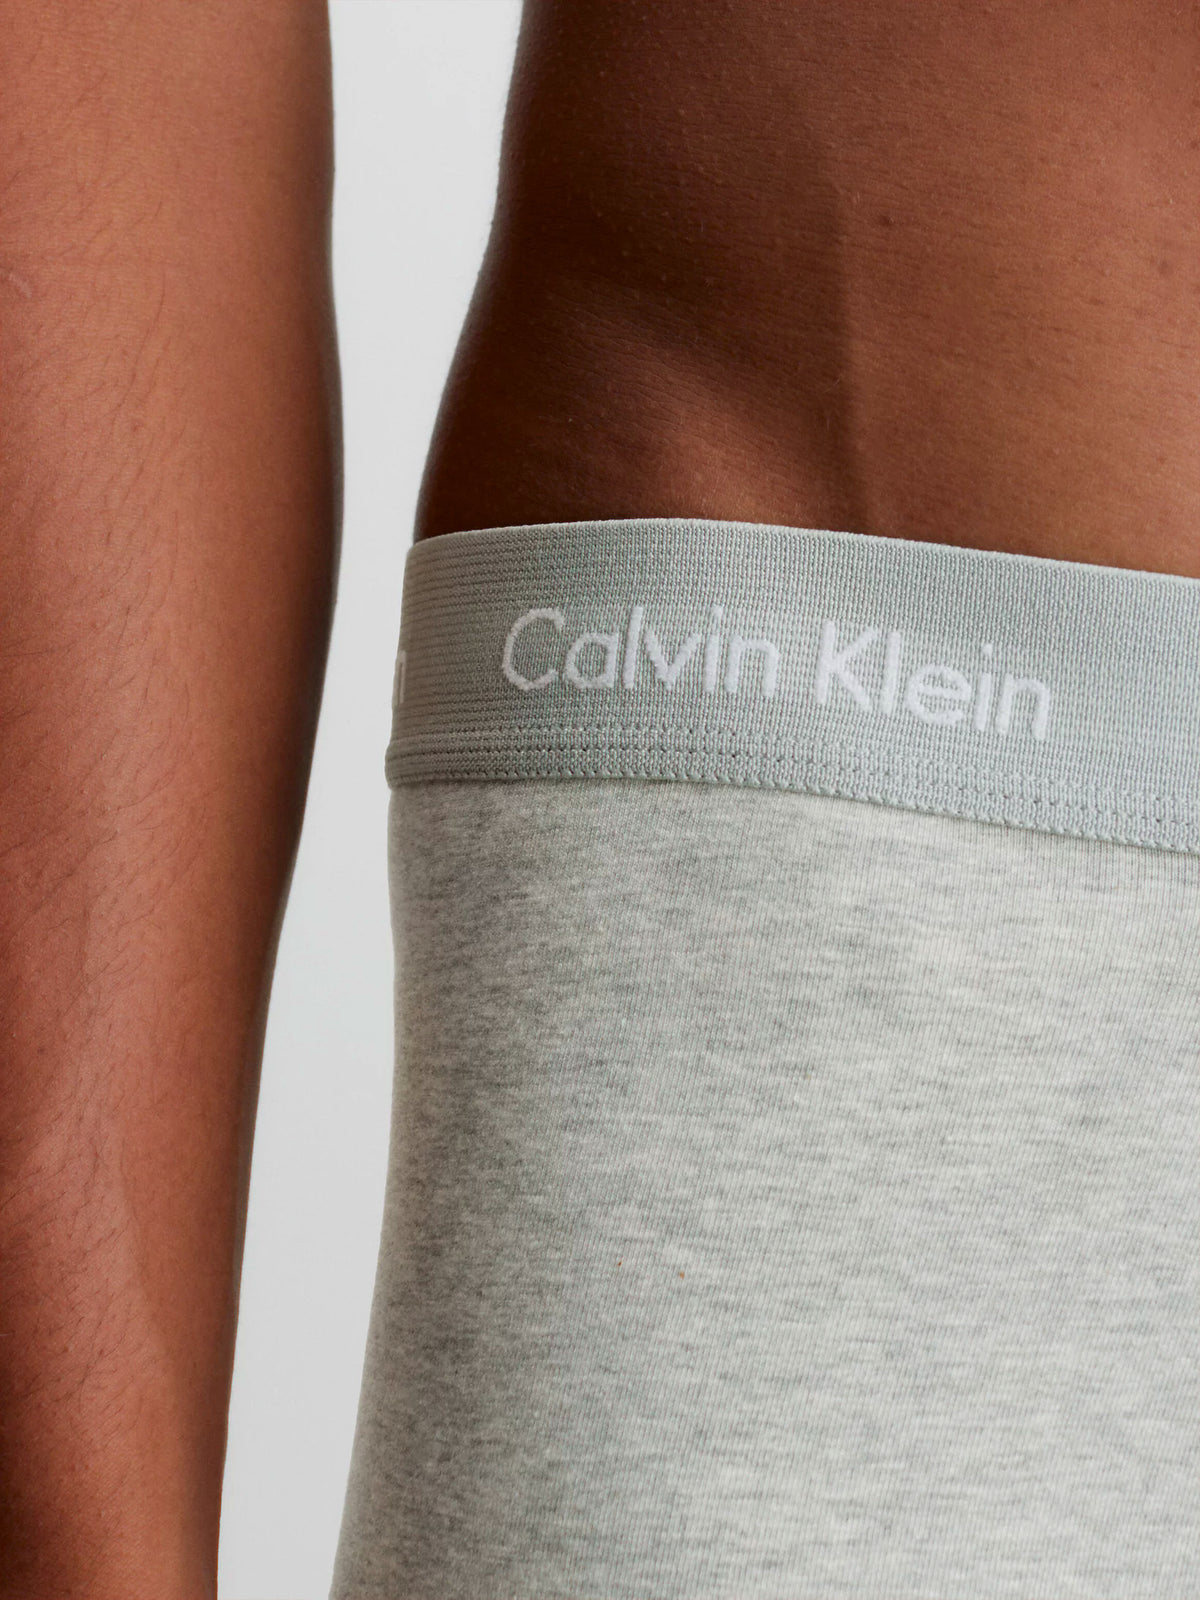 Mens Calvin Klein Boxer Shorts Low Rise Trunks 3 Pack, 04, U2664G, Wild Aster, GRY HTHR, Arctic Green